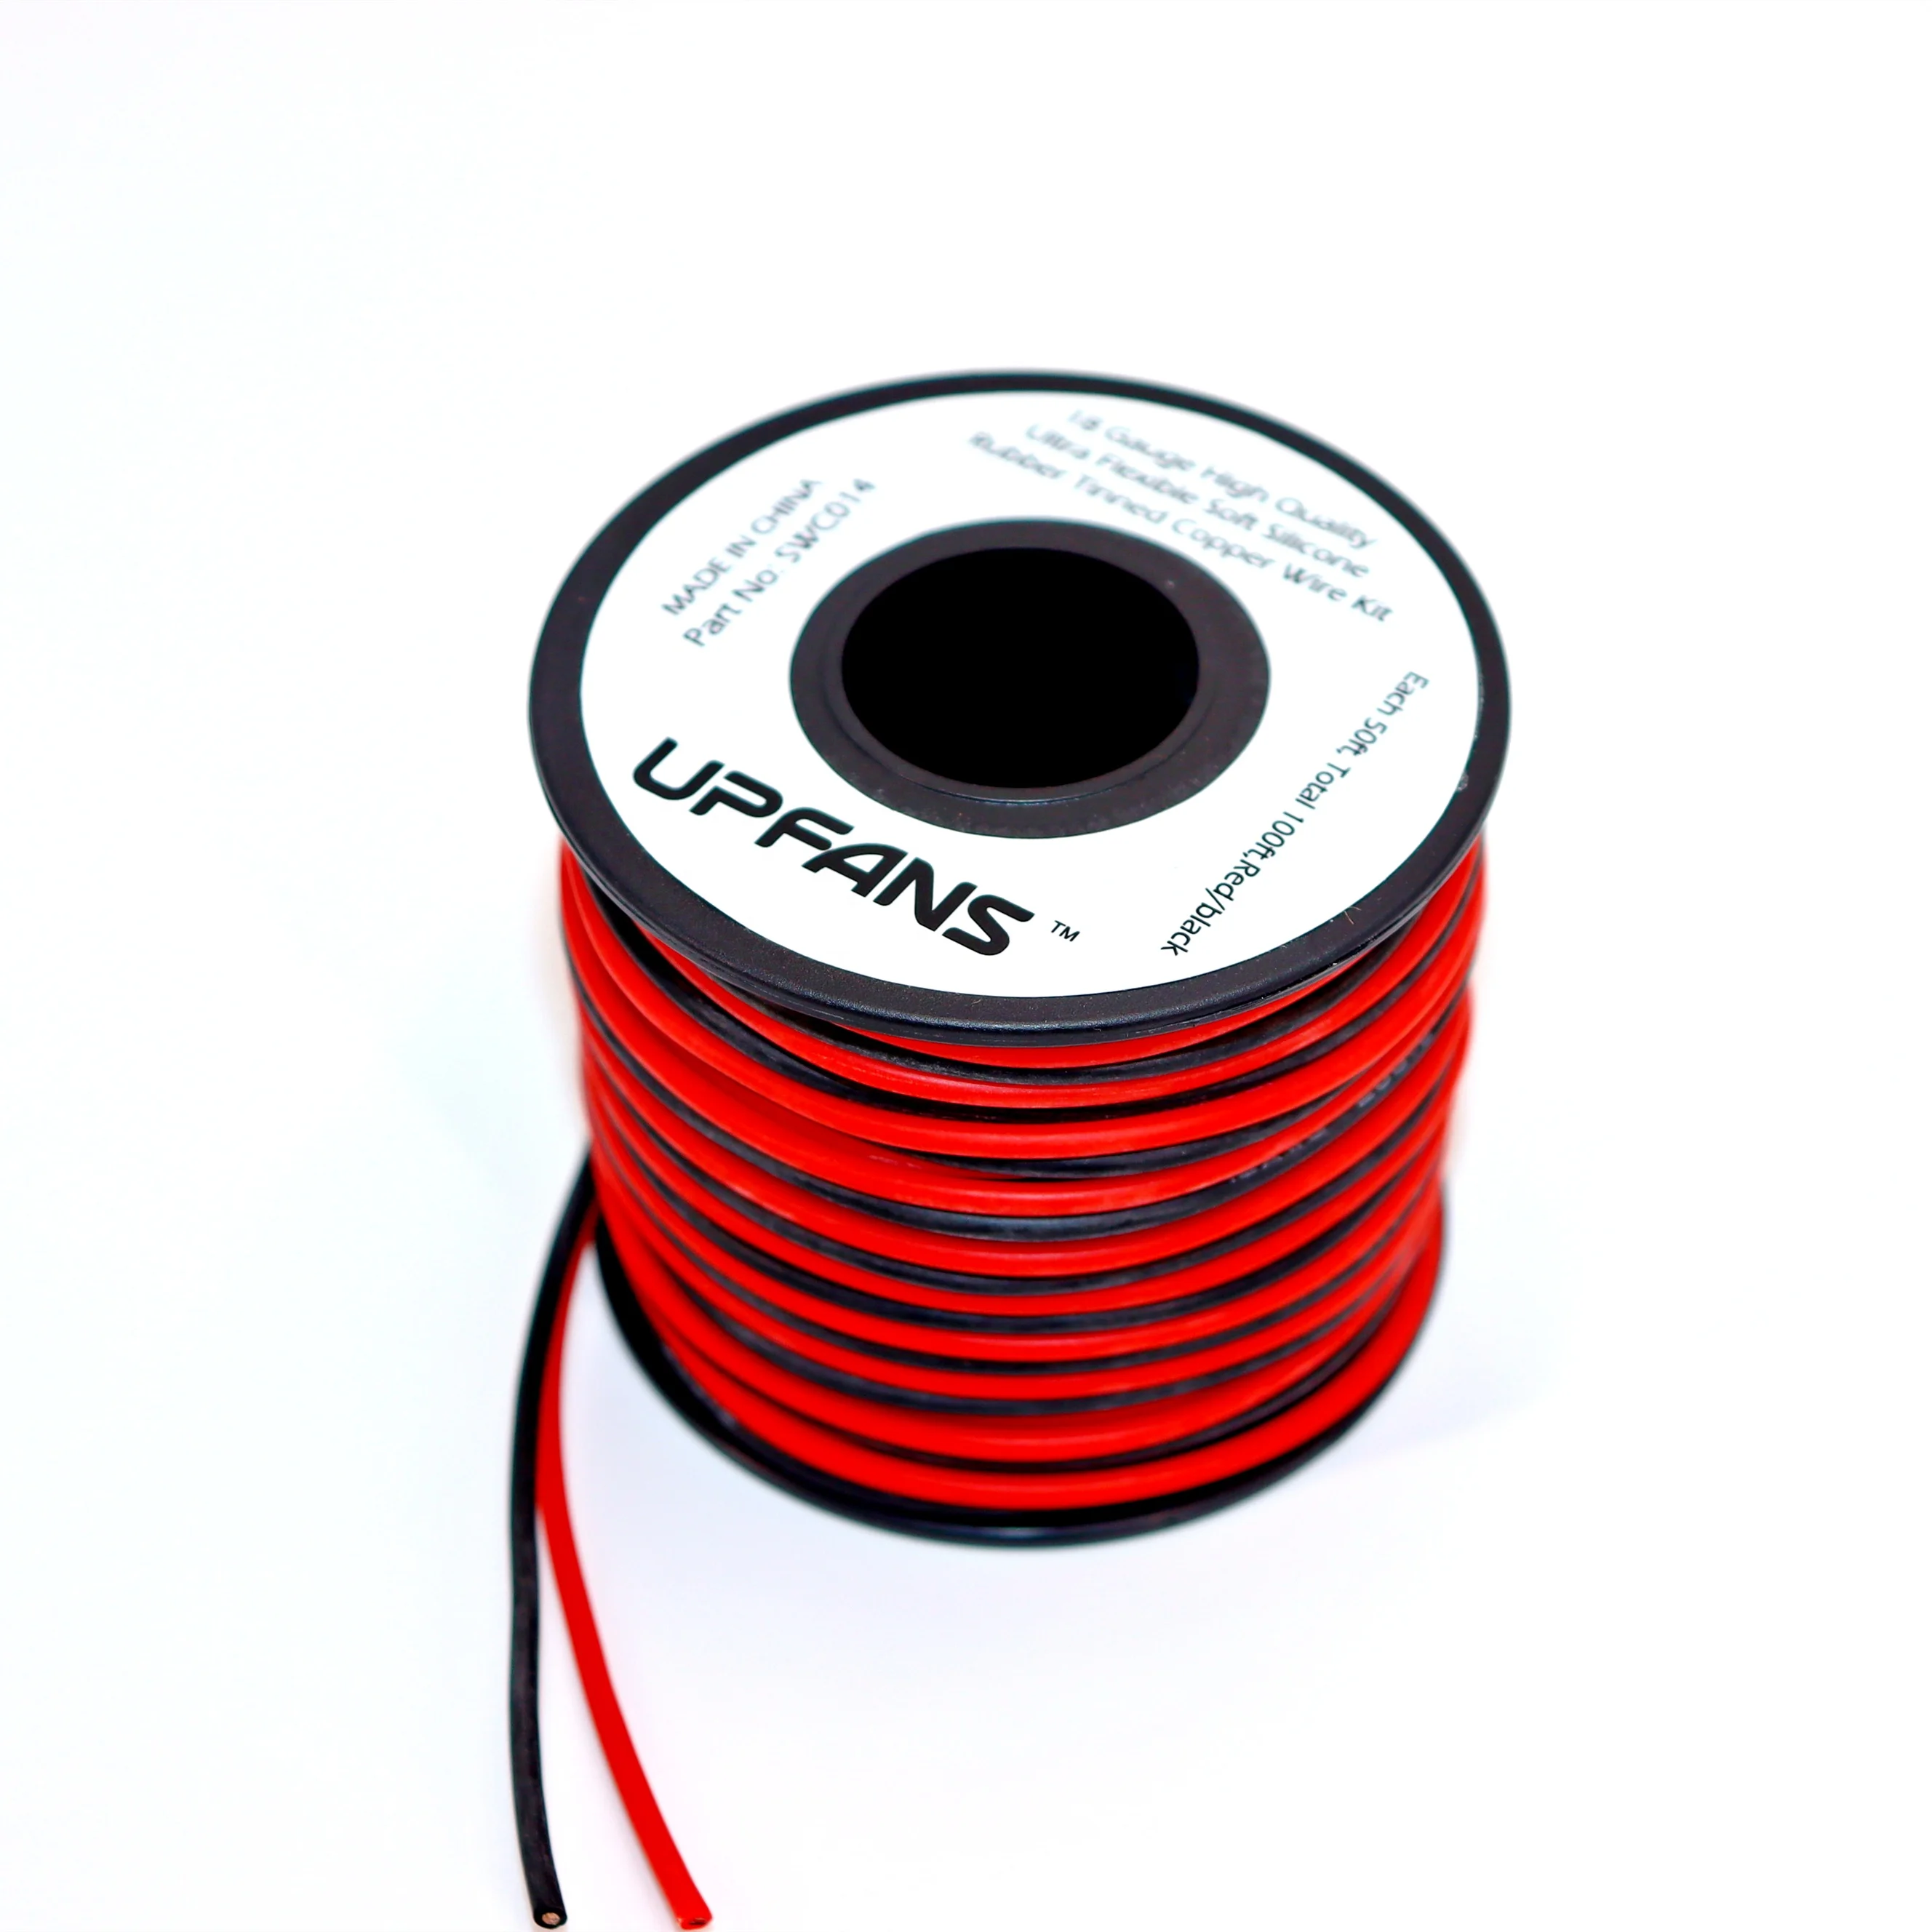 18 AWG Gauge Silicone Wire Spool Fine Strand Tinned Copper 100' each Red & Black 